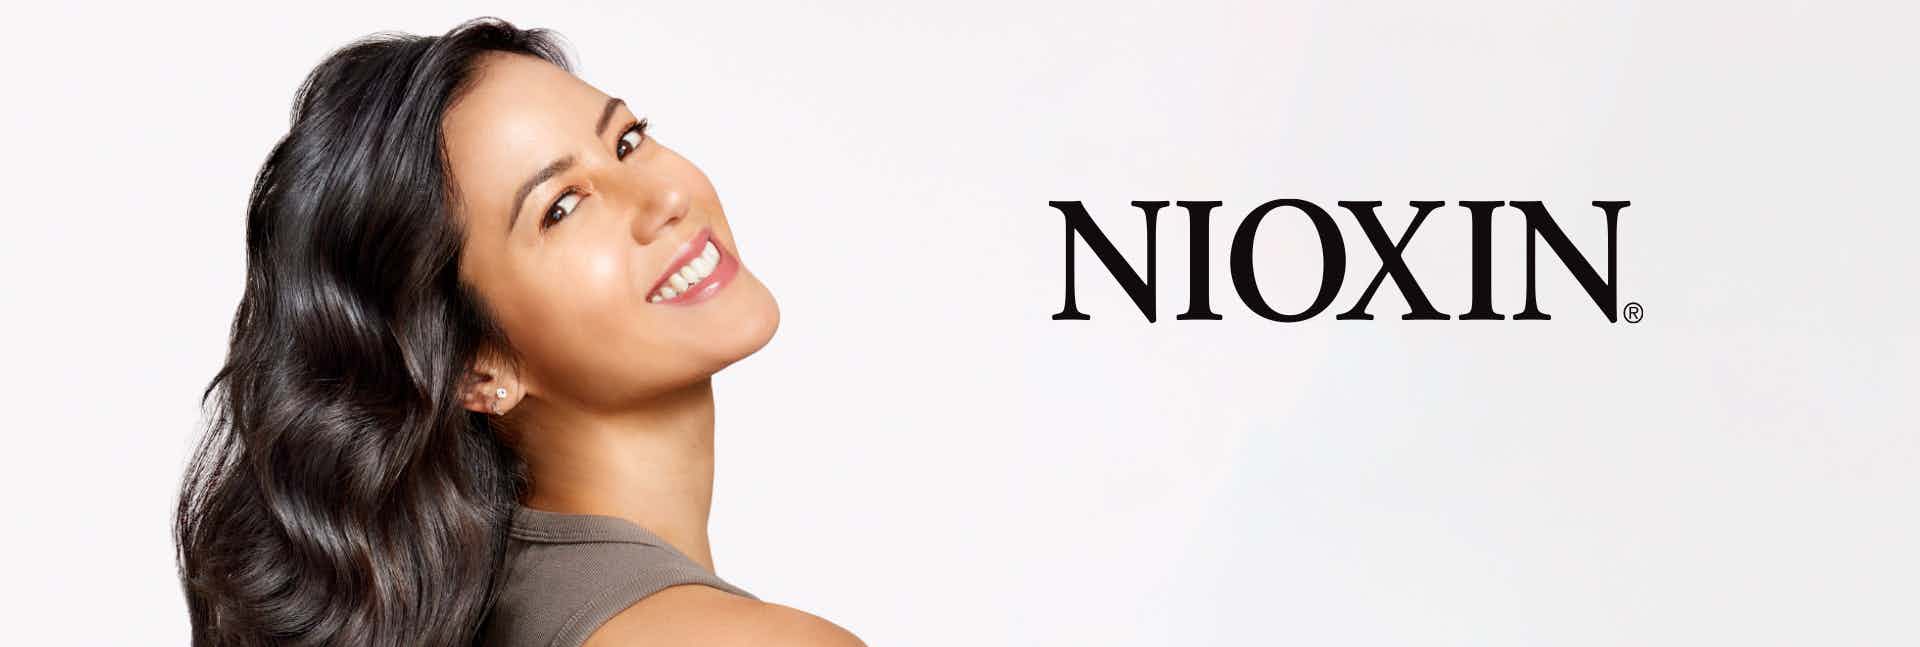 nioxin products for Hair Loss and Hair Thinning  